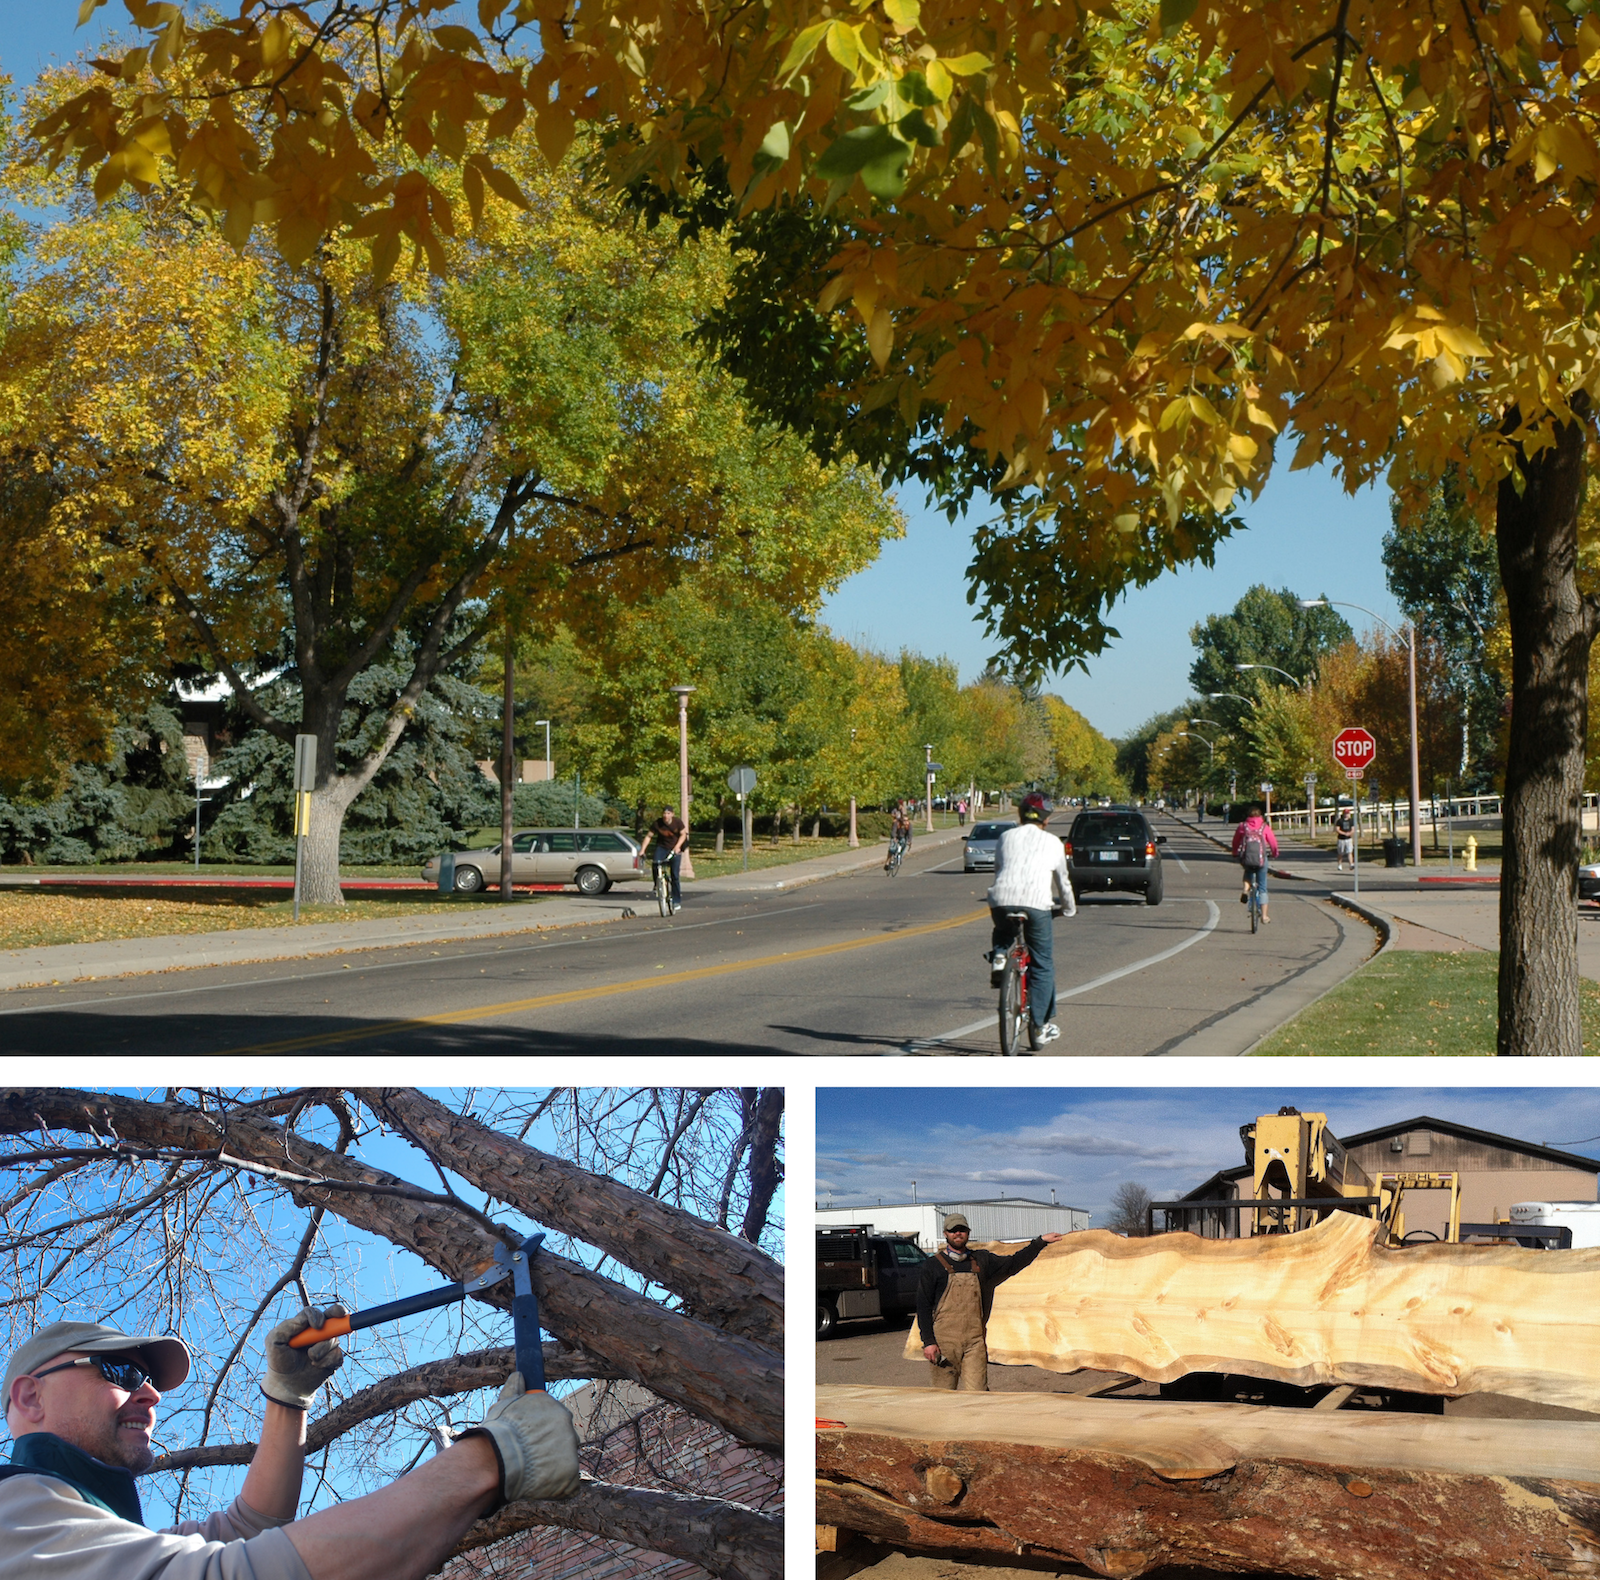 bikers on a tree-lined street, someone pruning a tree, and a log cut in half